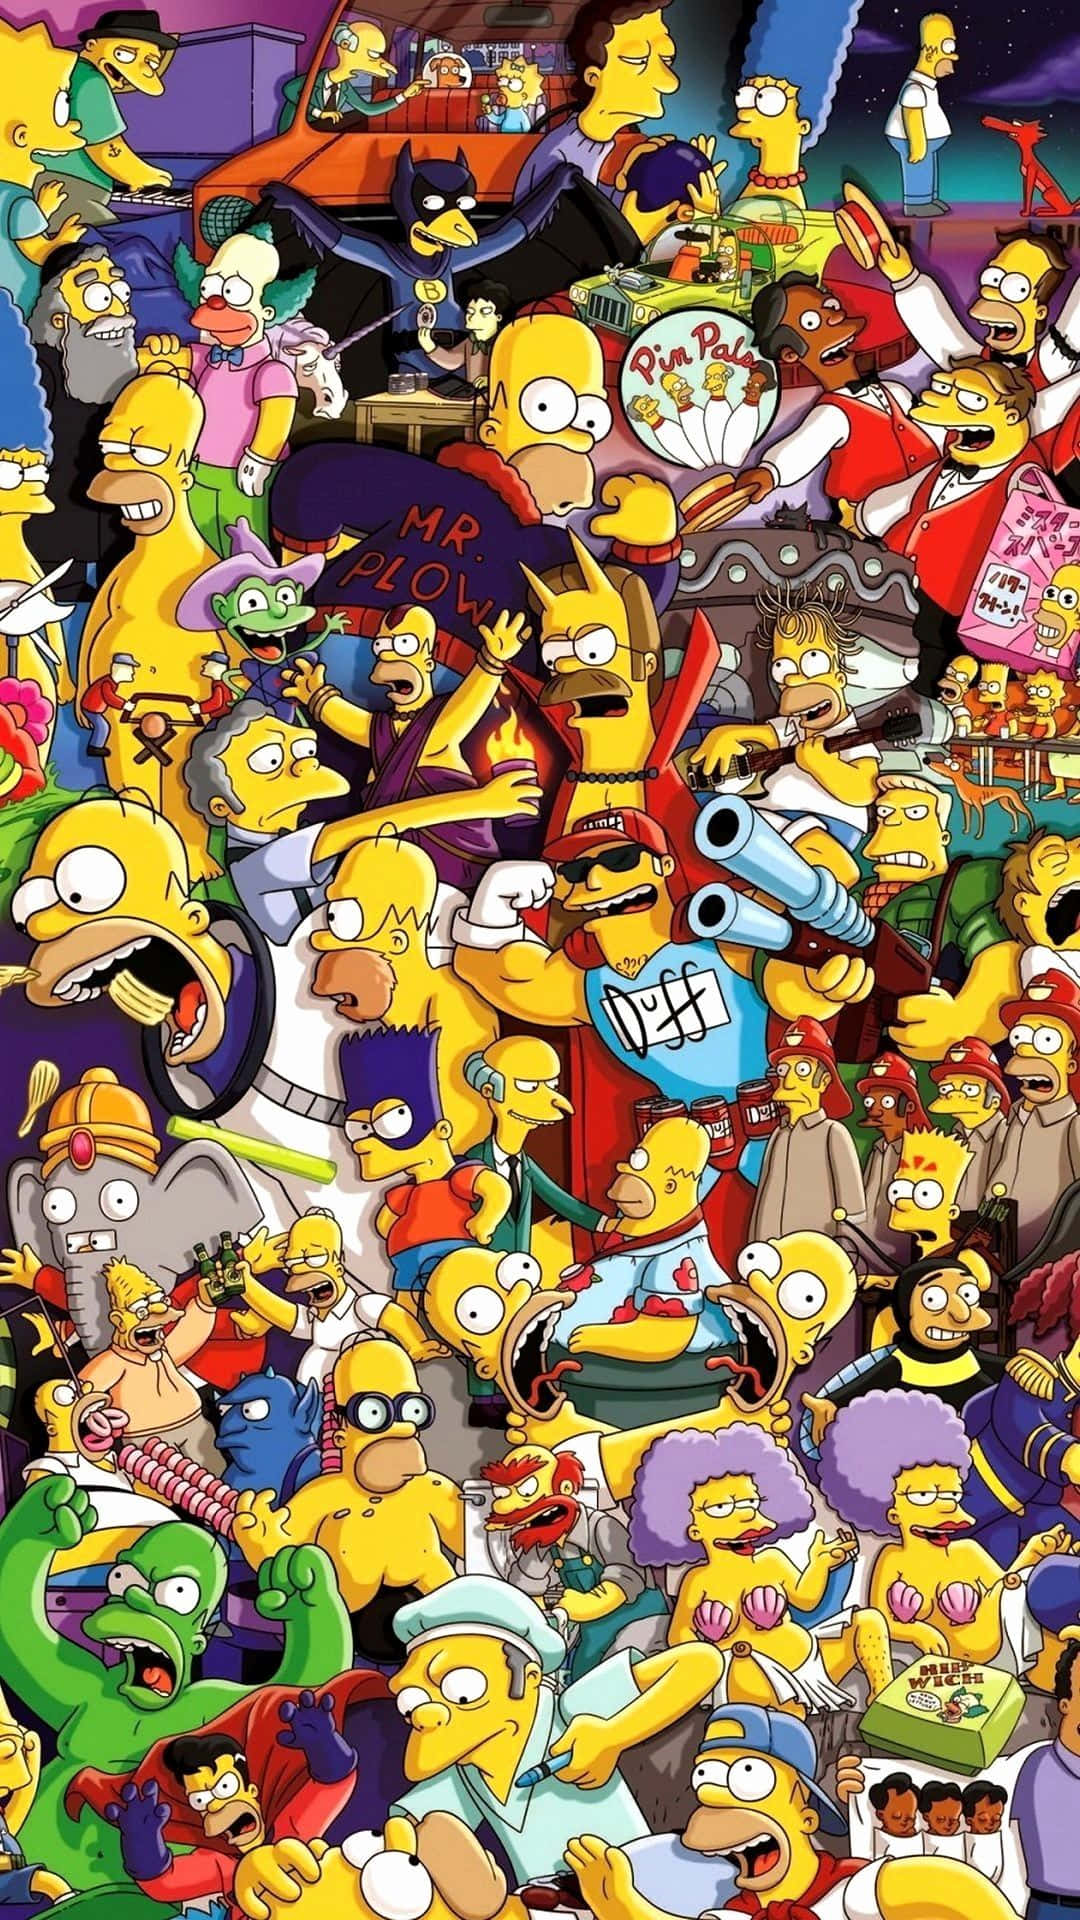 Supreme Simpson spreading joy and happiness Wallpaper